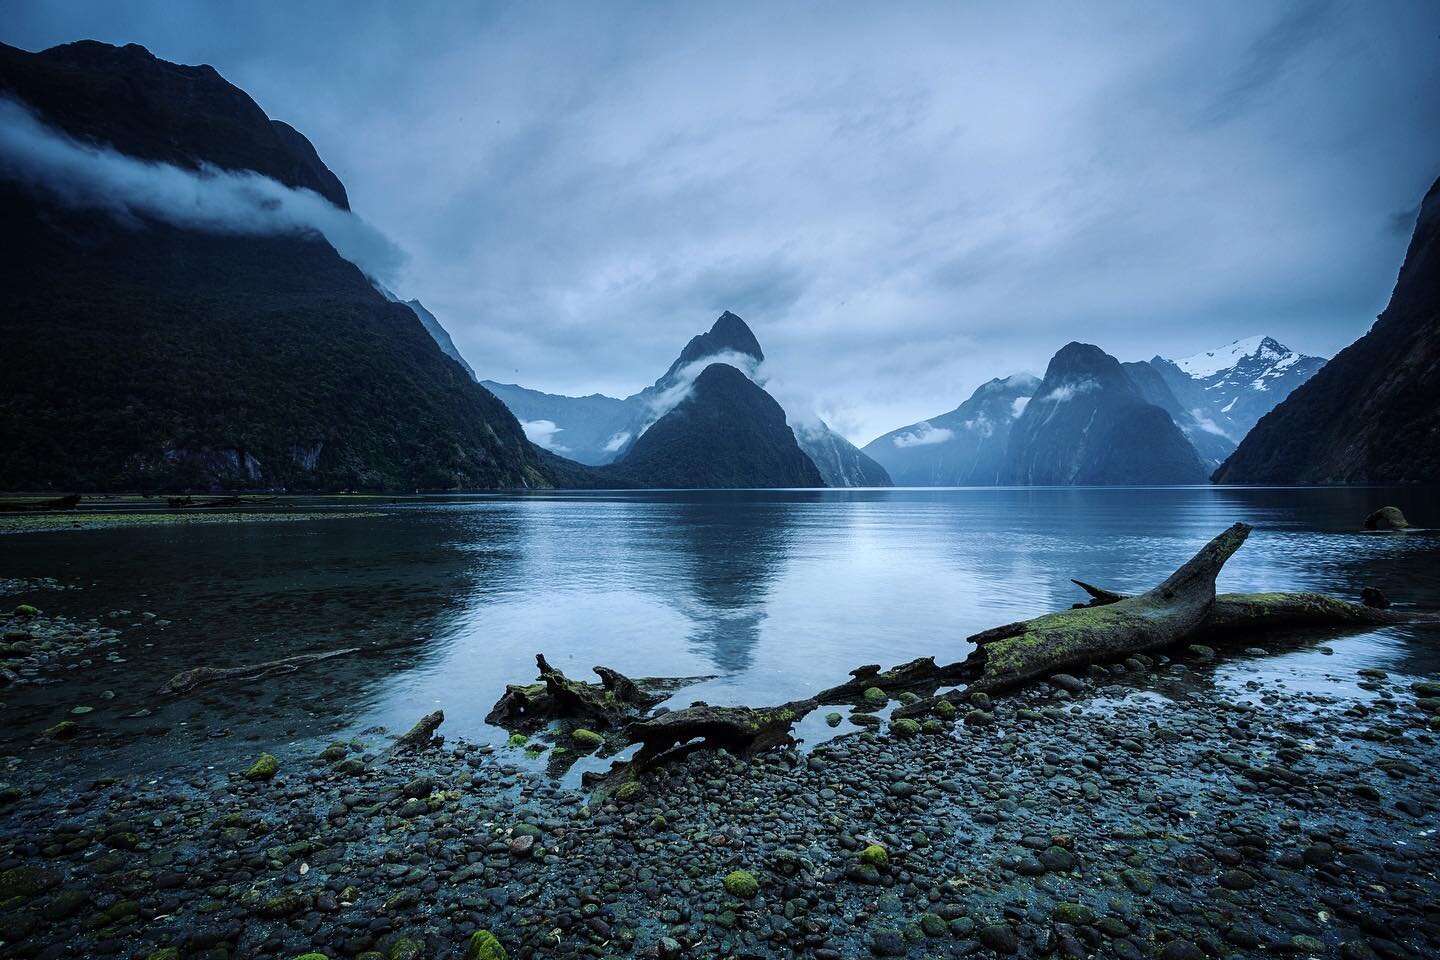 Moody Milford vibes (from back in November)

#milfordsound #mitrepeak #newzealand #nz